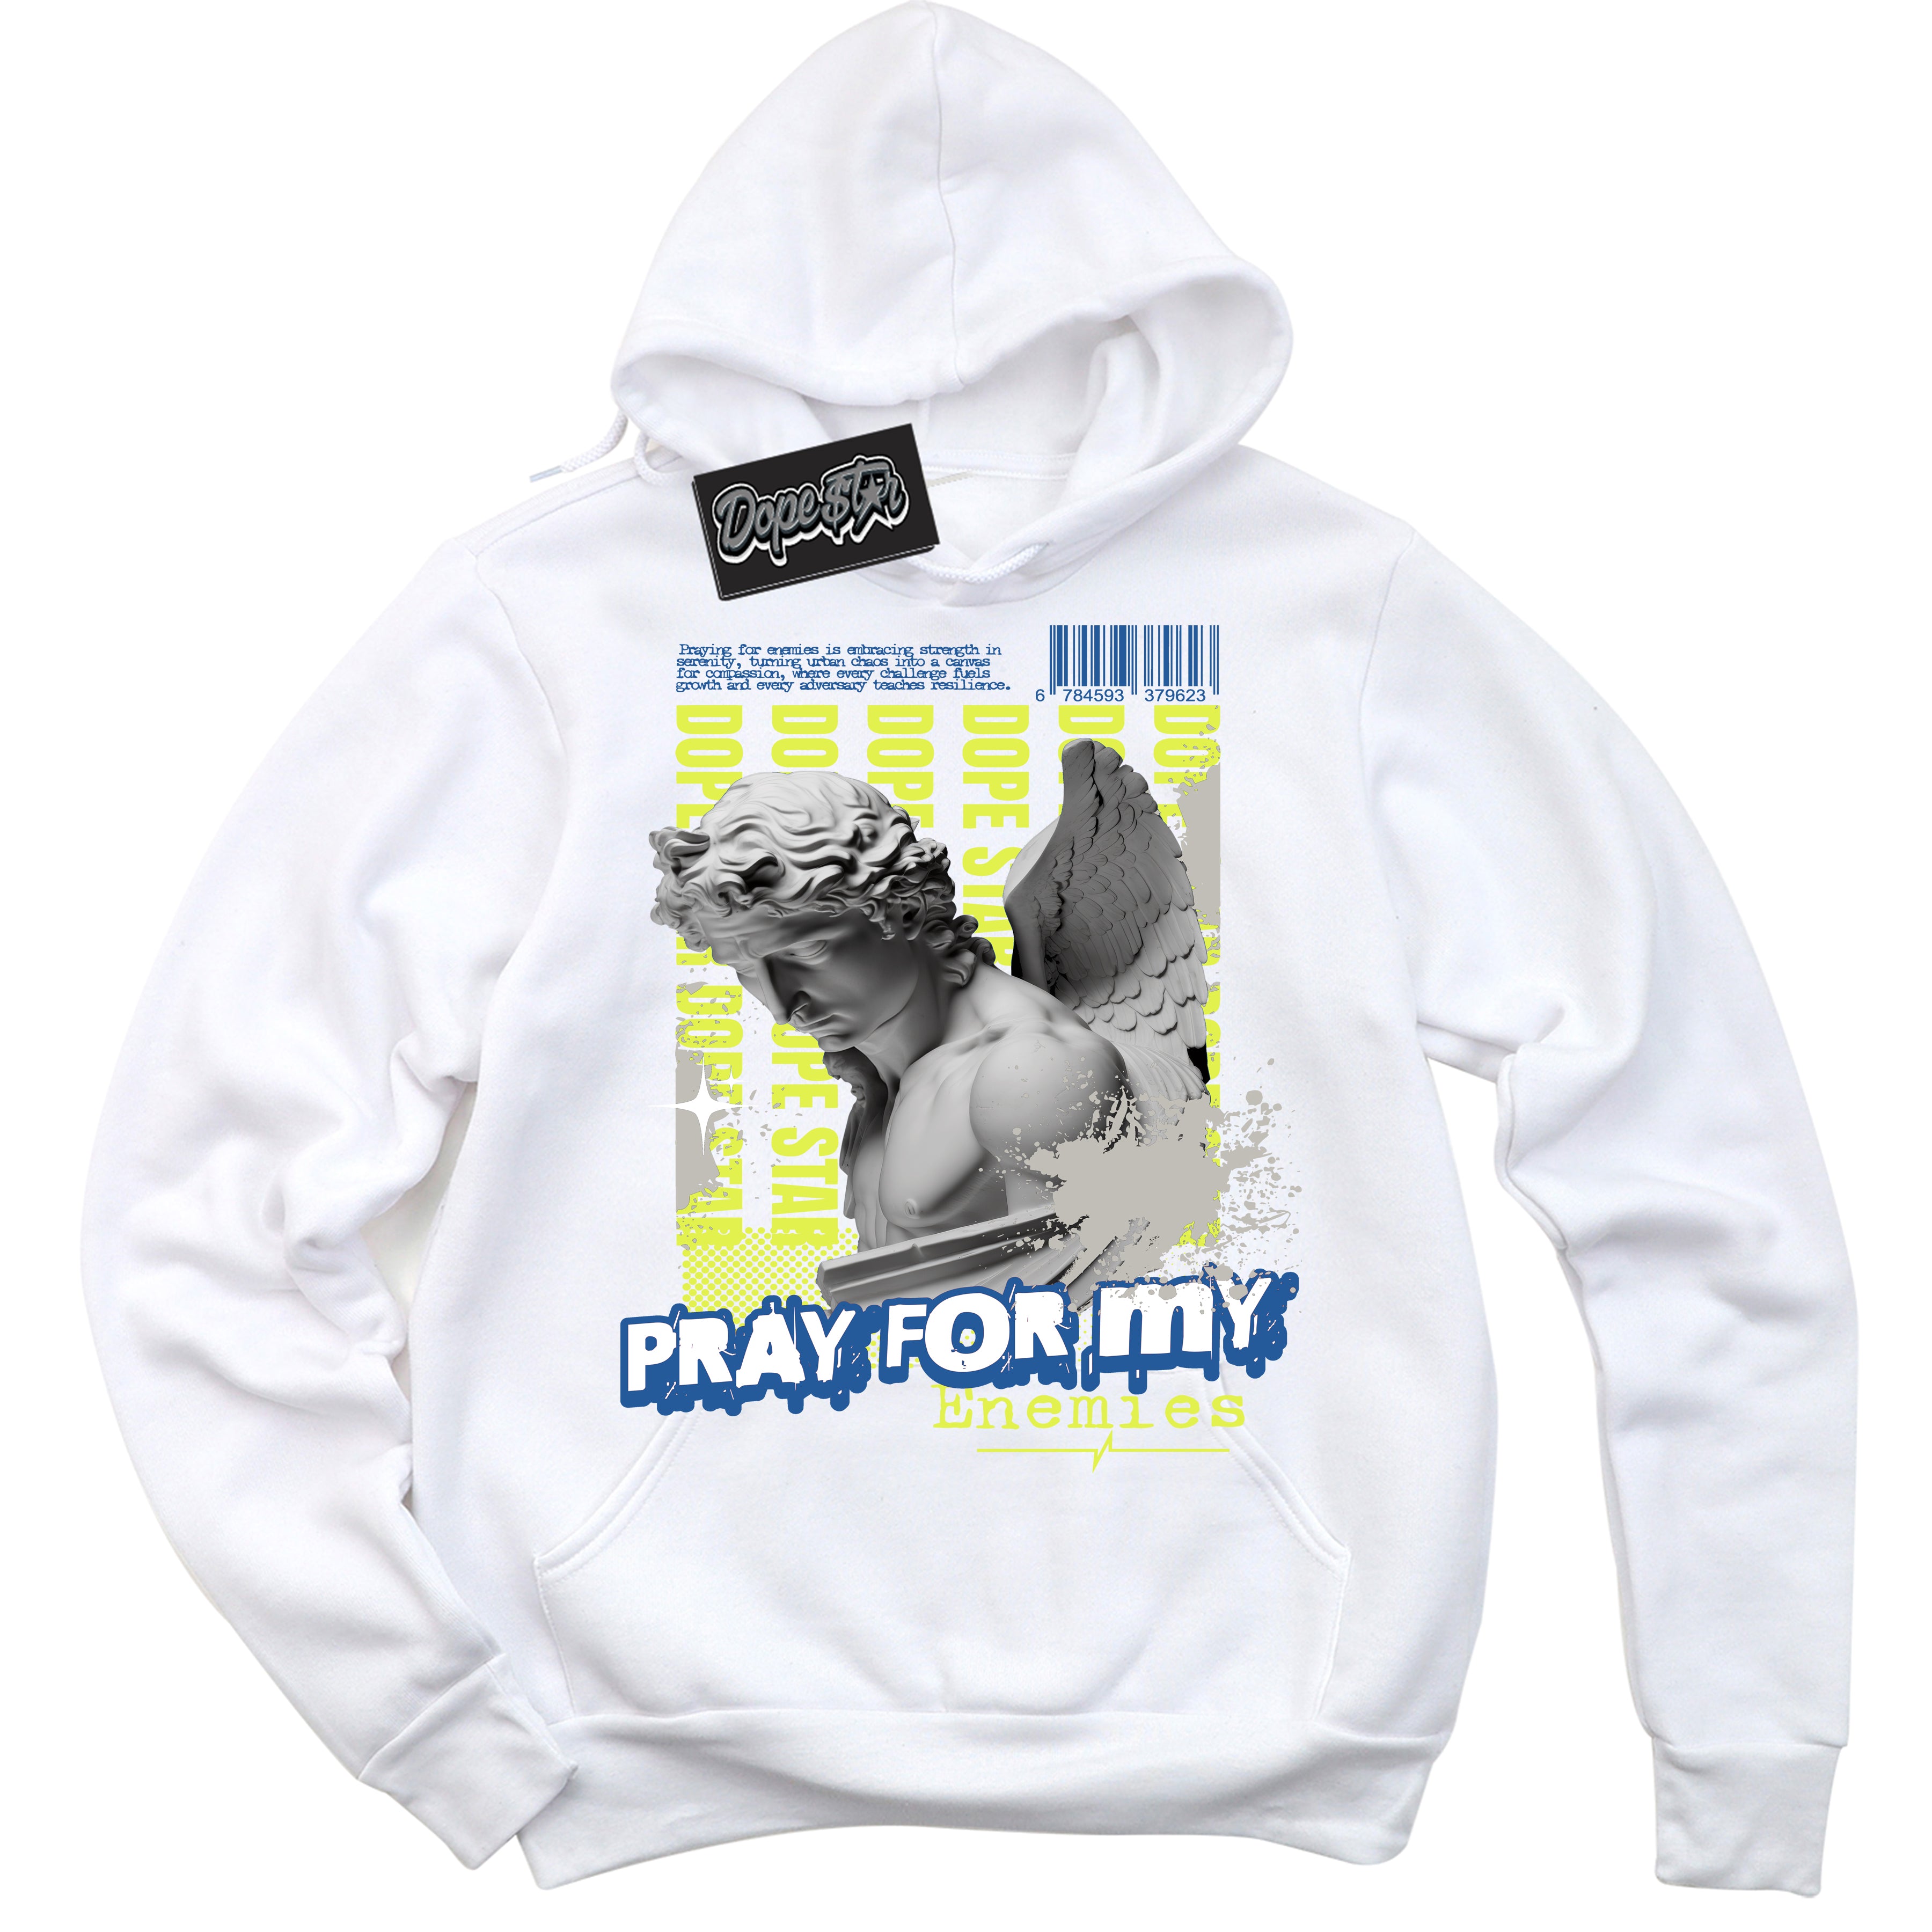 Cool White Hoodie with “ Pray Enemies ”  design that Perfectly Matches '86 Air Max Day 1s  Sneakers.